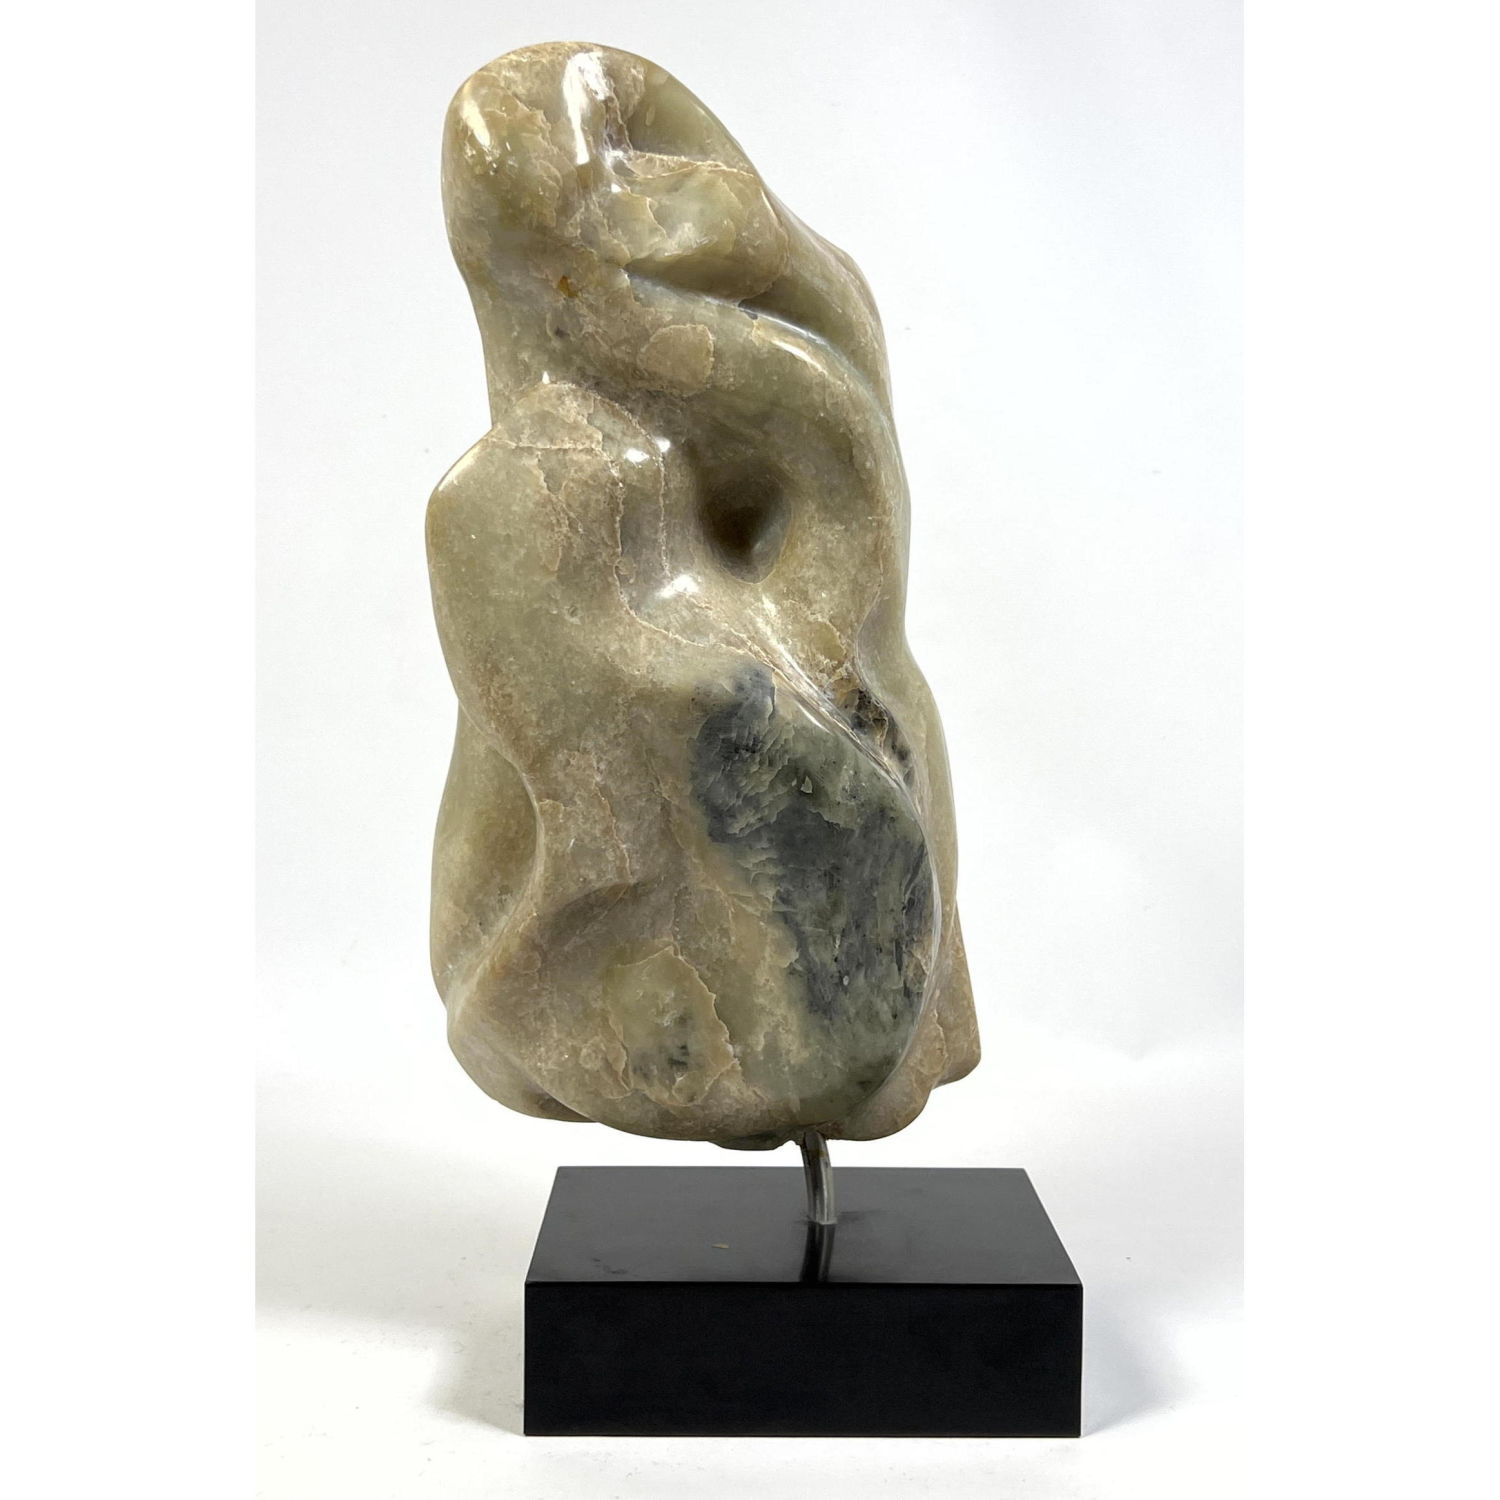 Organic Carved Stone Abstract Sculpture.